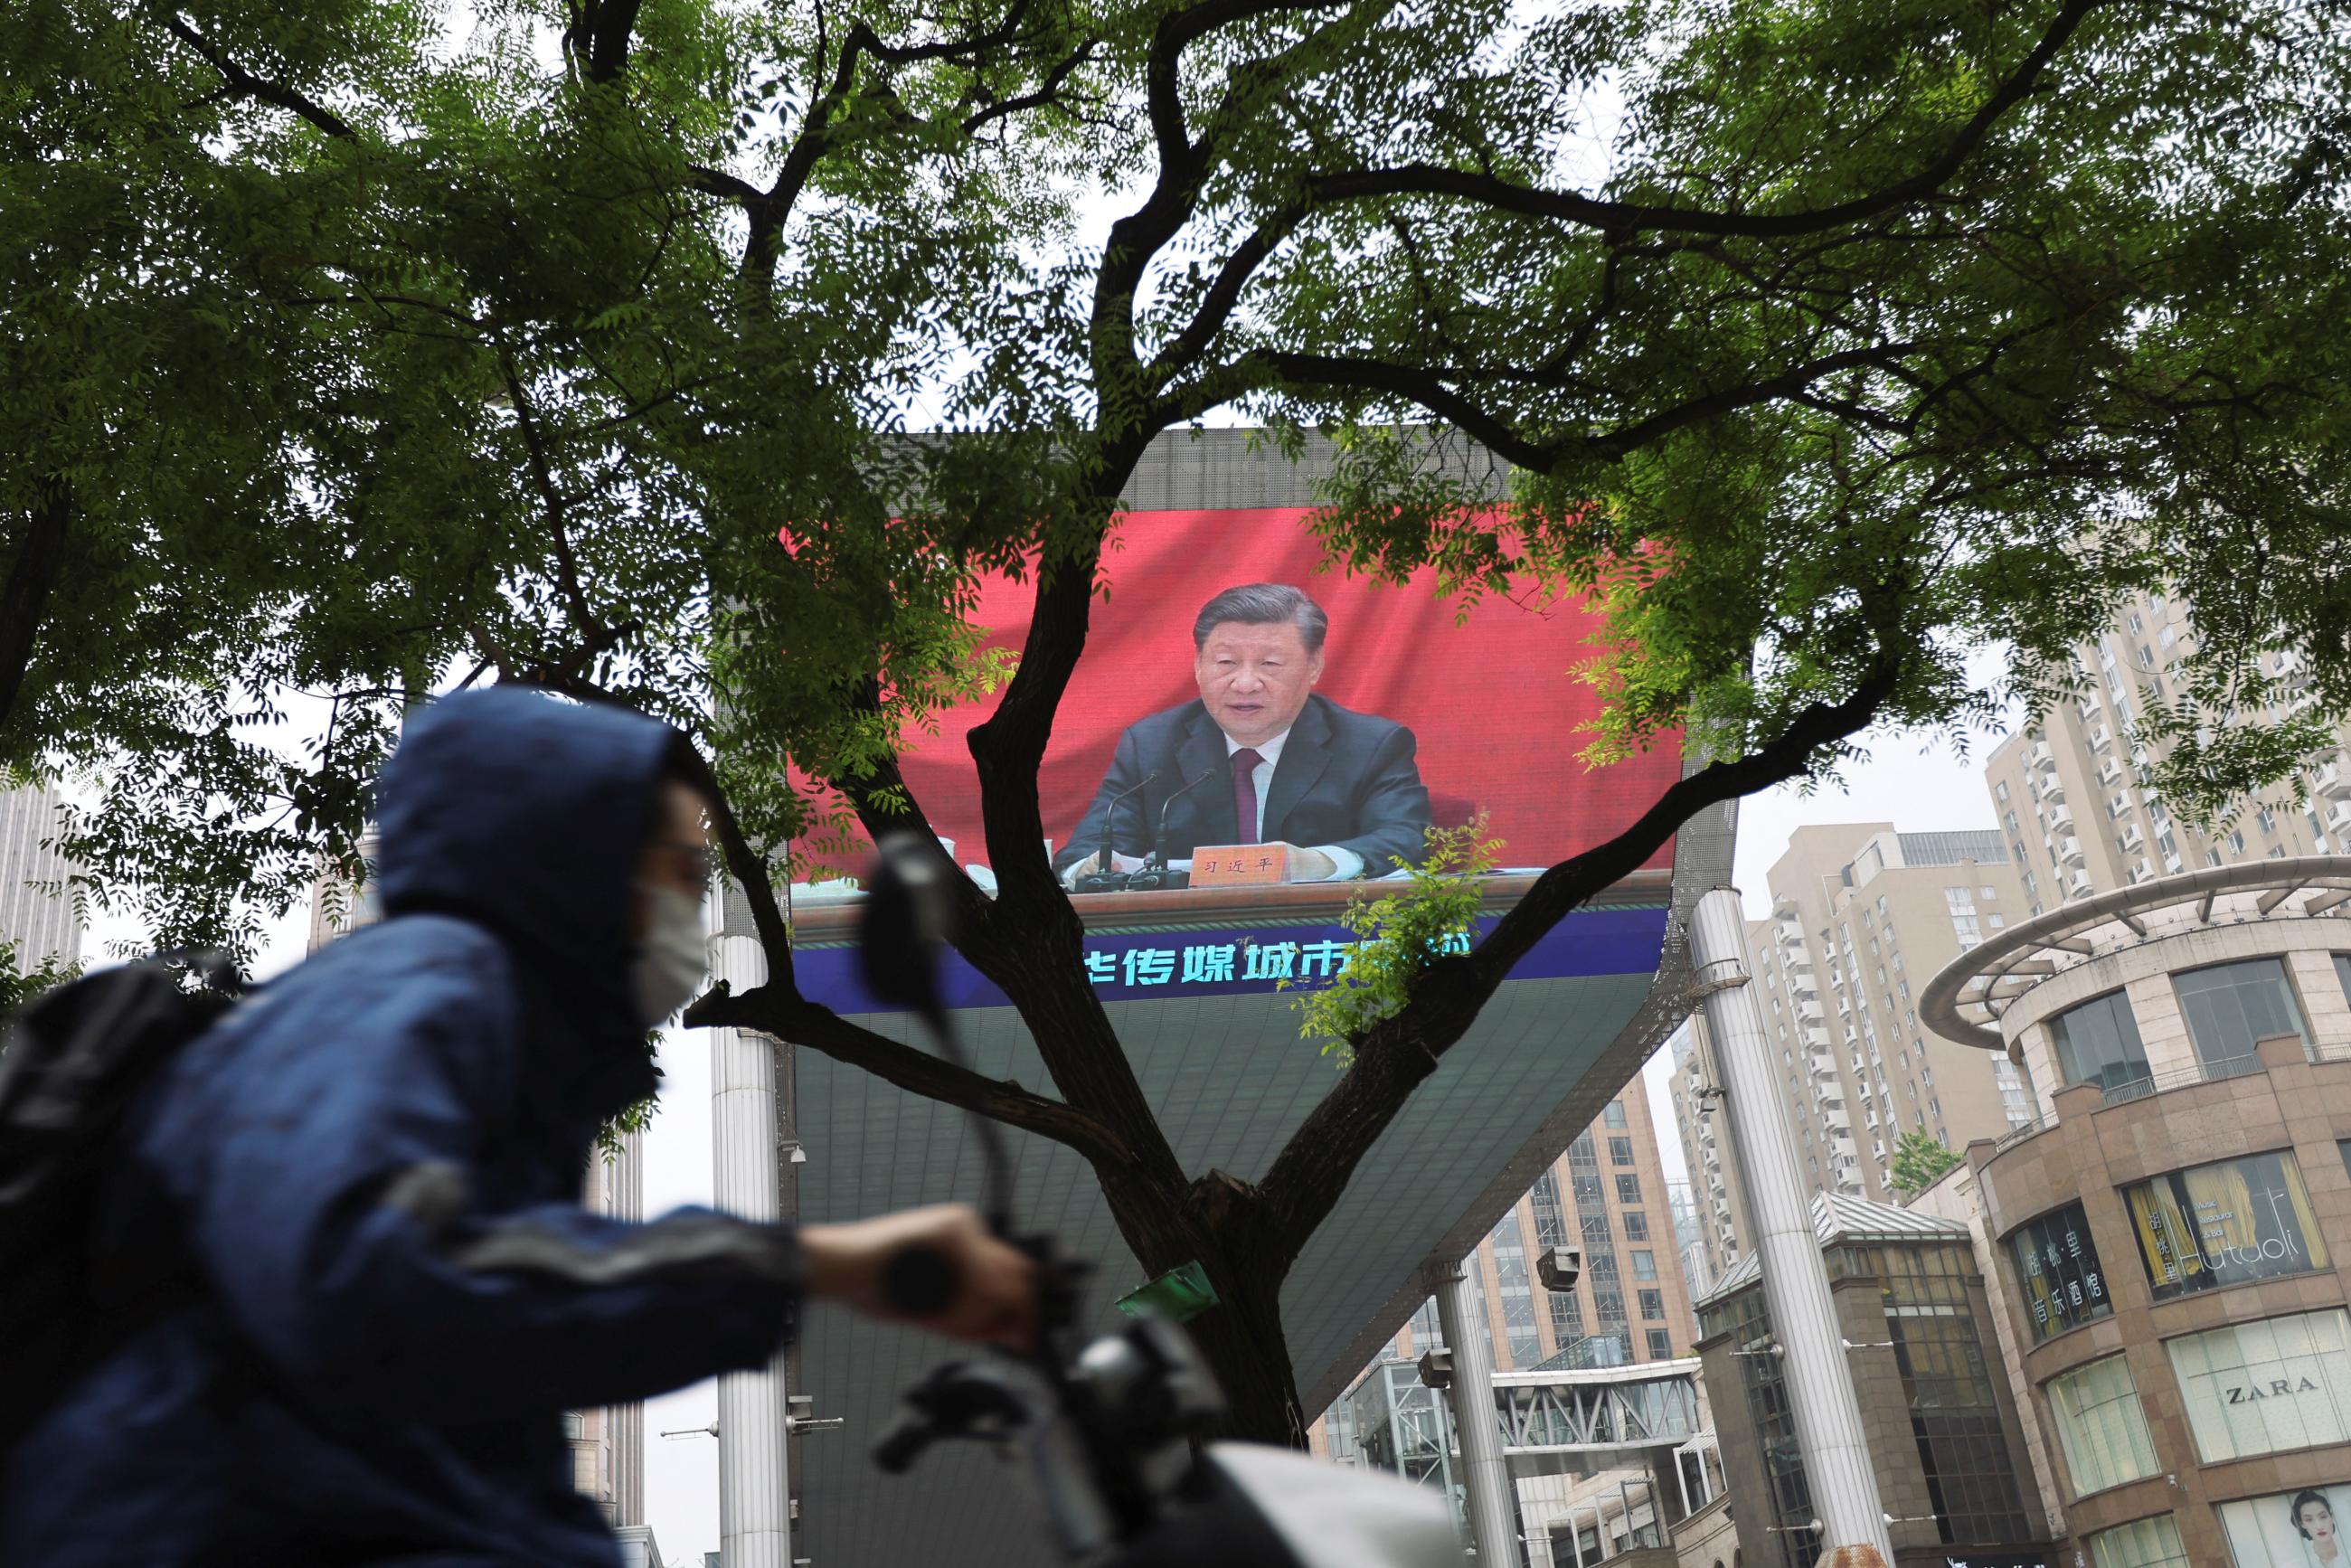 A man wearing a face mask rides past a giant screen showing Chinese President Xi Jinping speaking.